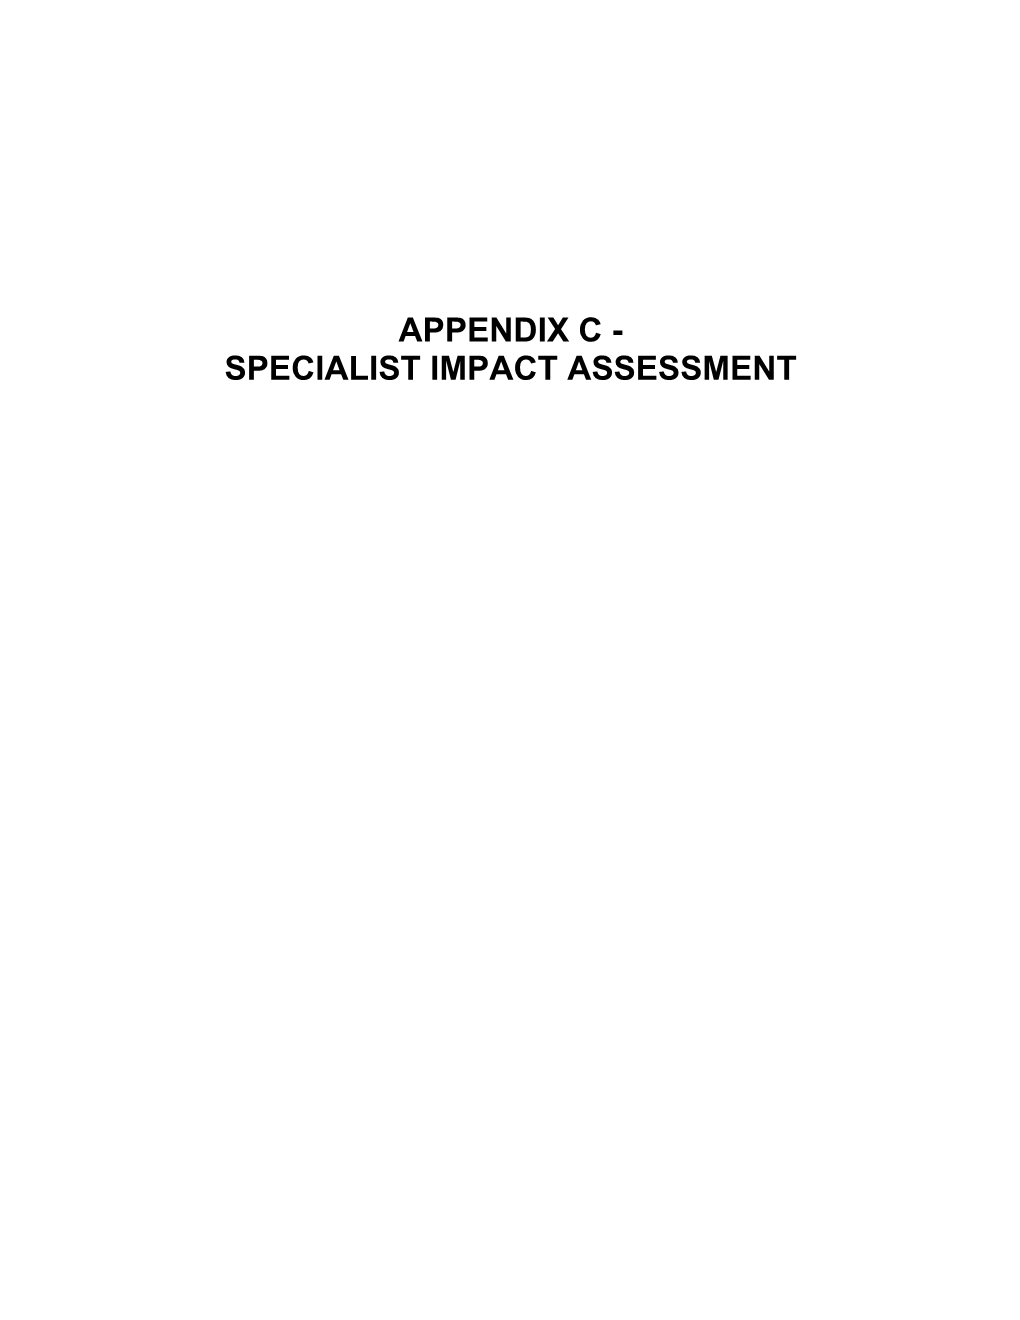 Specialist Impact Assessment